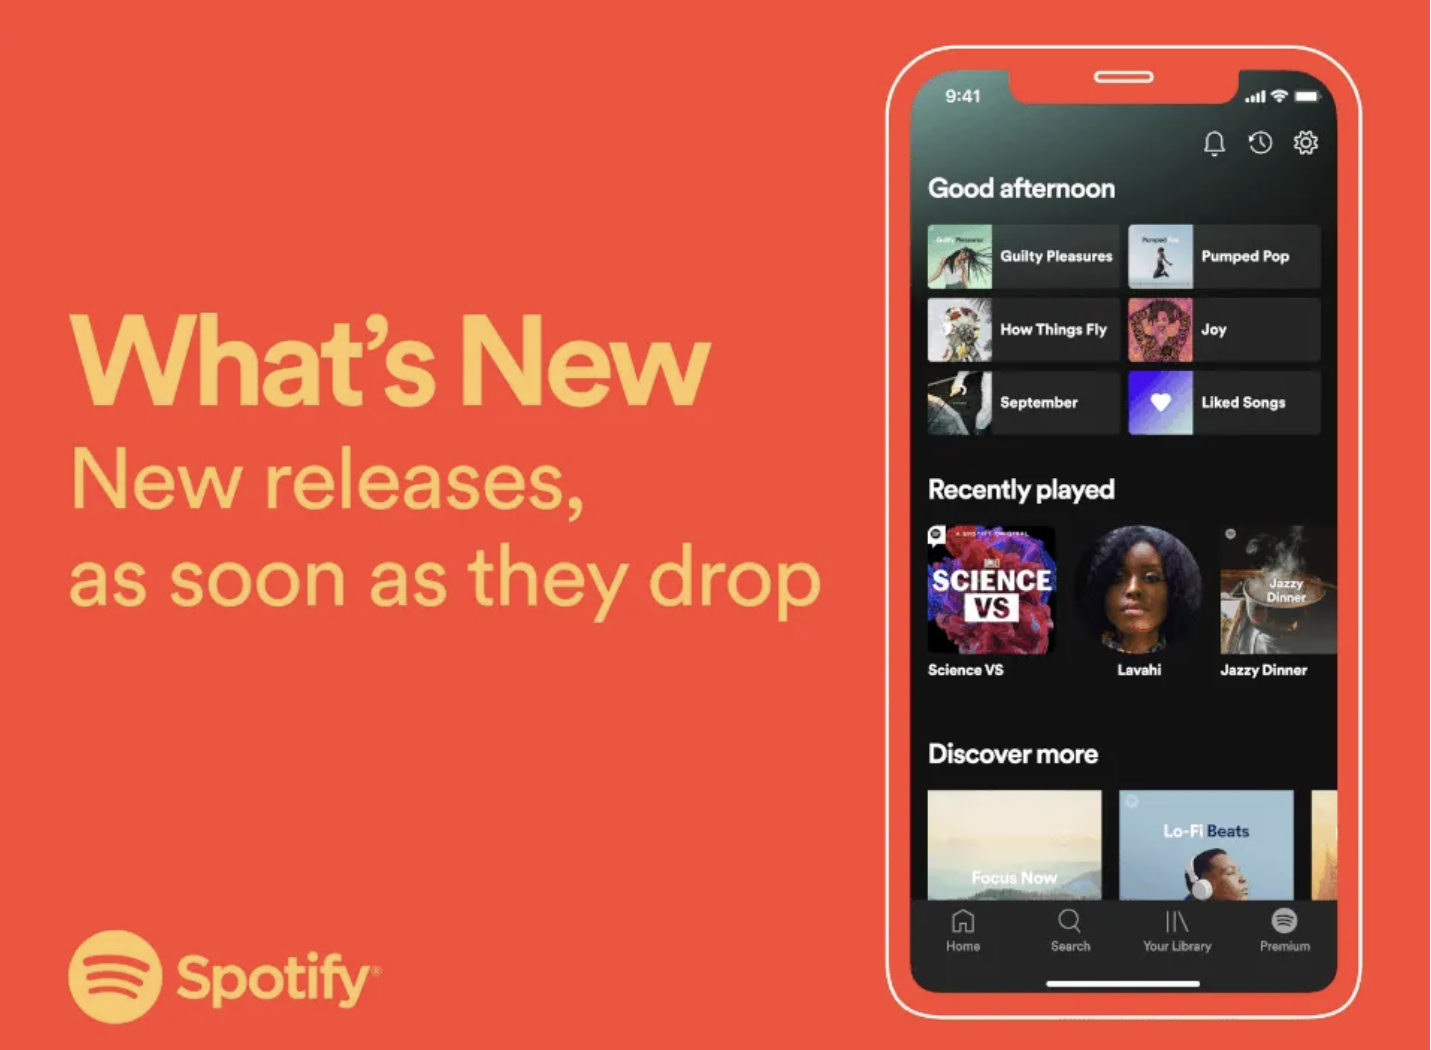 Spotify-s notification about the new releases